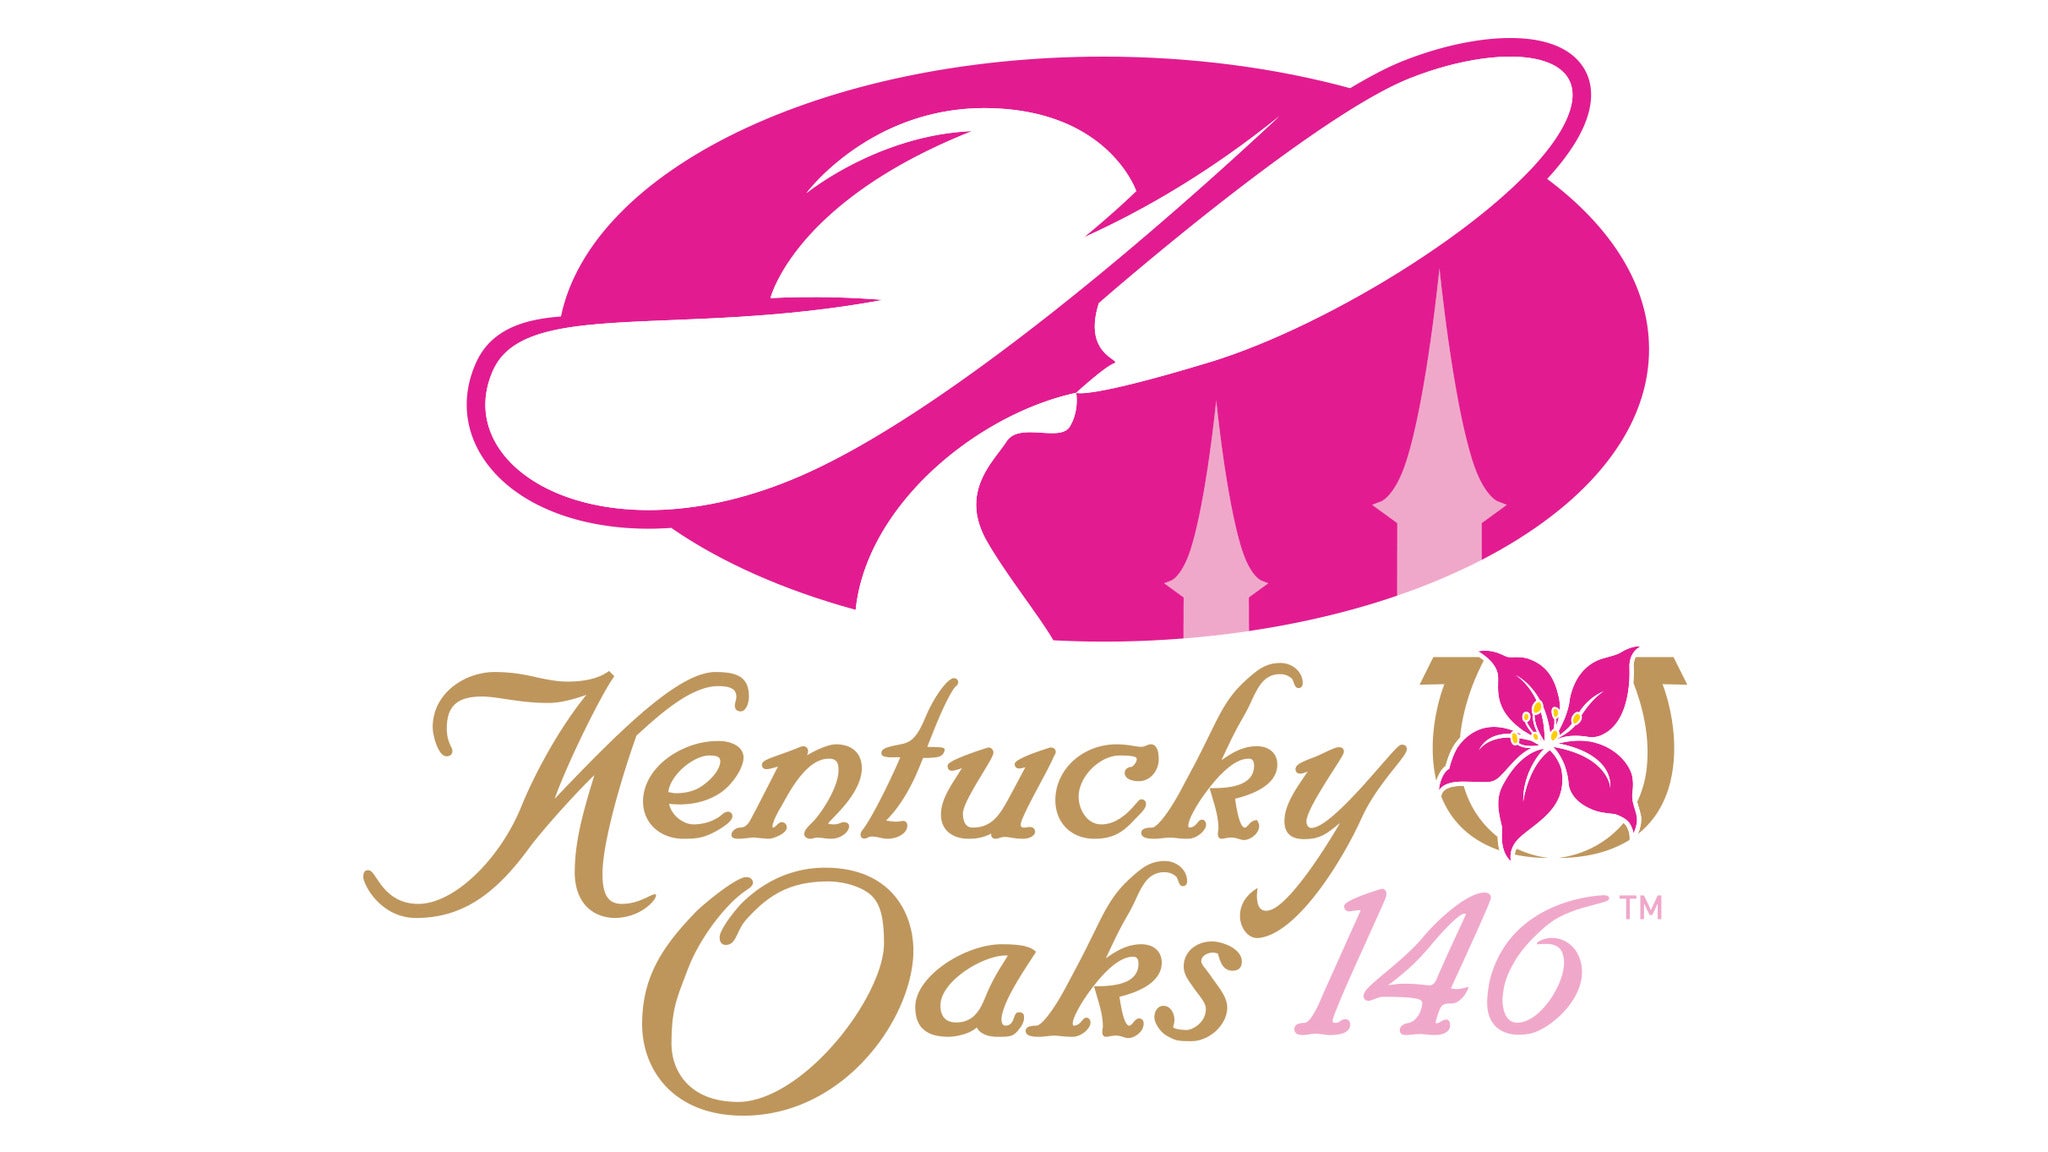 145th Kentucky Oaks - Infield & Paddock General Admission Single Day in Louisville promo photo for Early Bird Pricing presale offer code